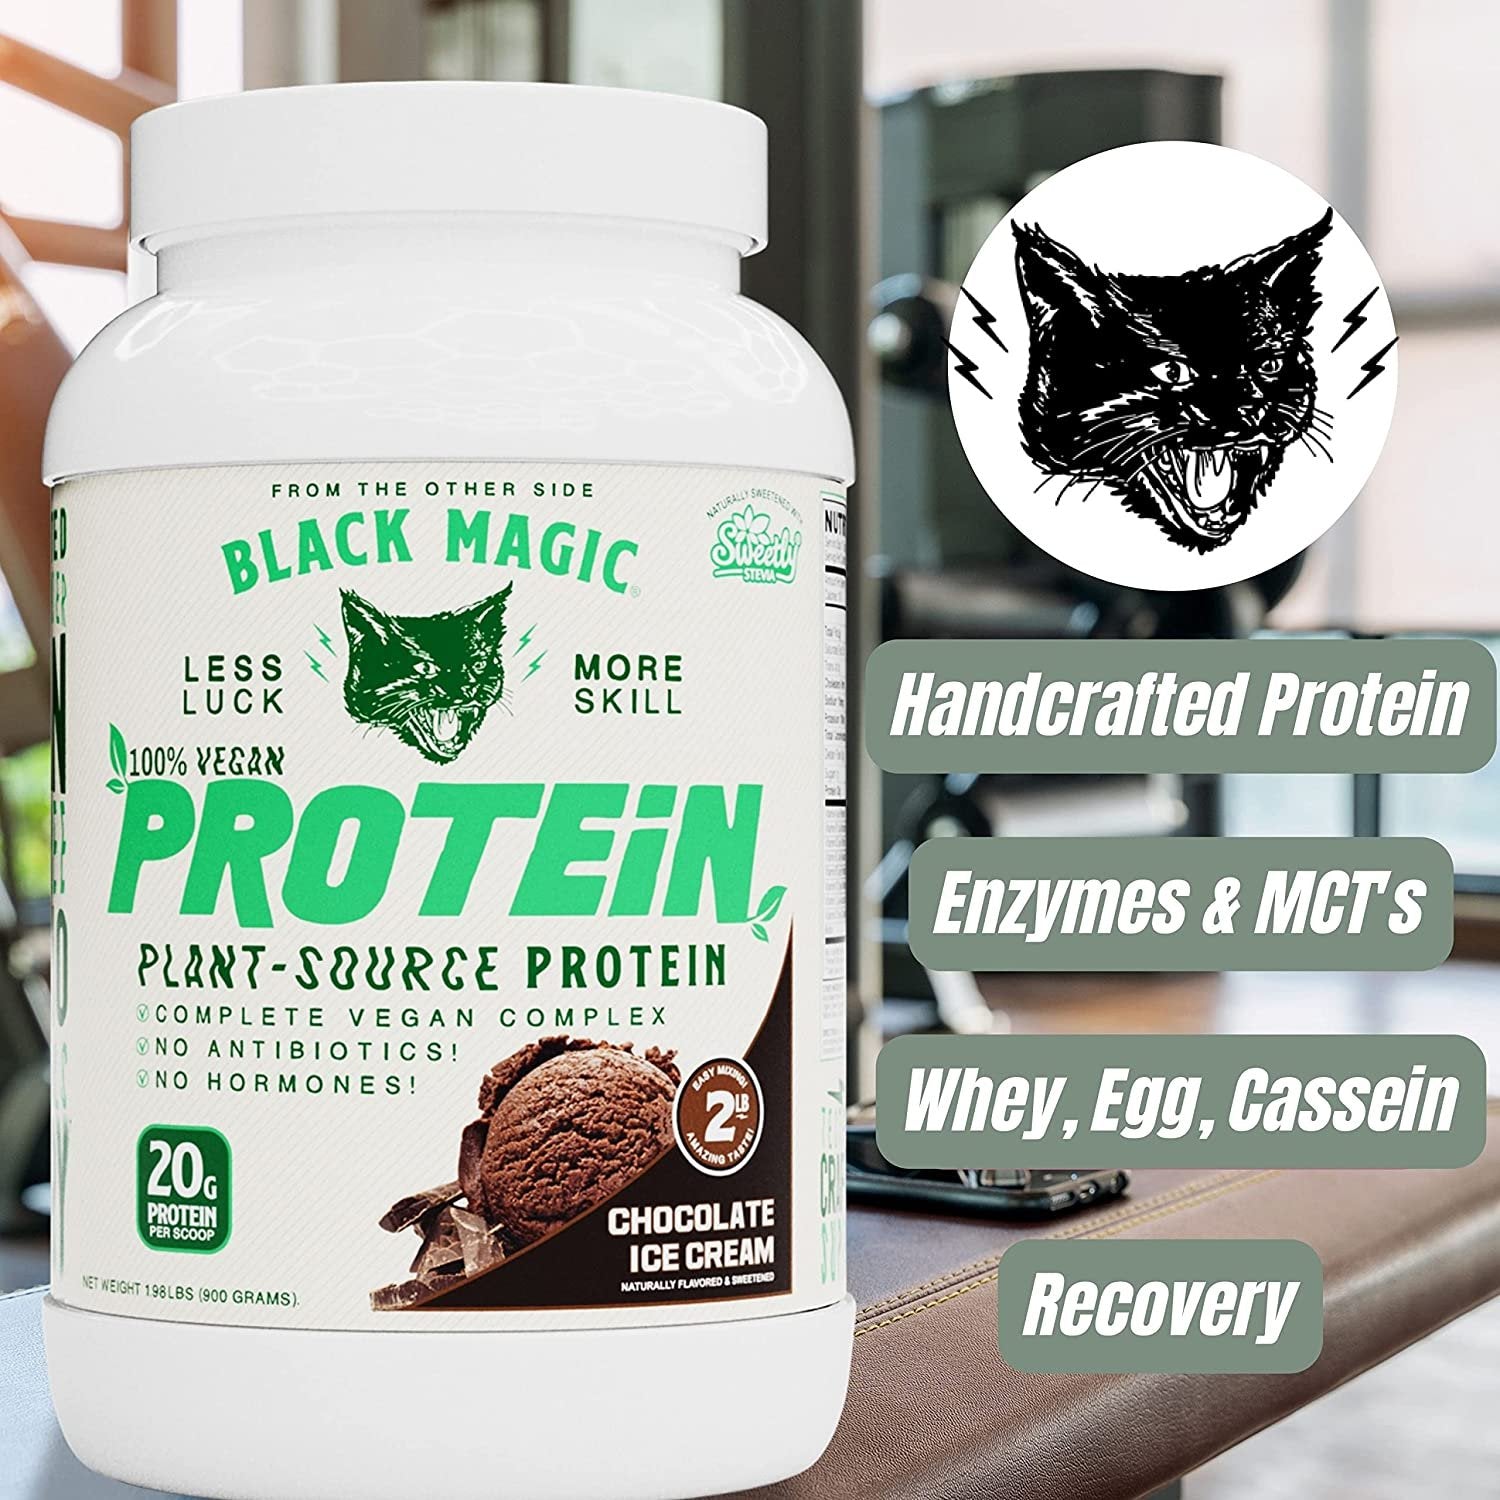 Vegan Chocolate Ice Cream Black Magic Multi-Source Protein - Whey, Egg, and Casein Complex with Enzymes & MCT Powder - Pre Workout and Post Workout - 24g Protein - 2 LB with Bonus Key Chain